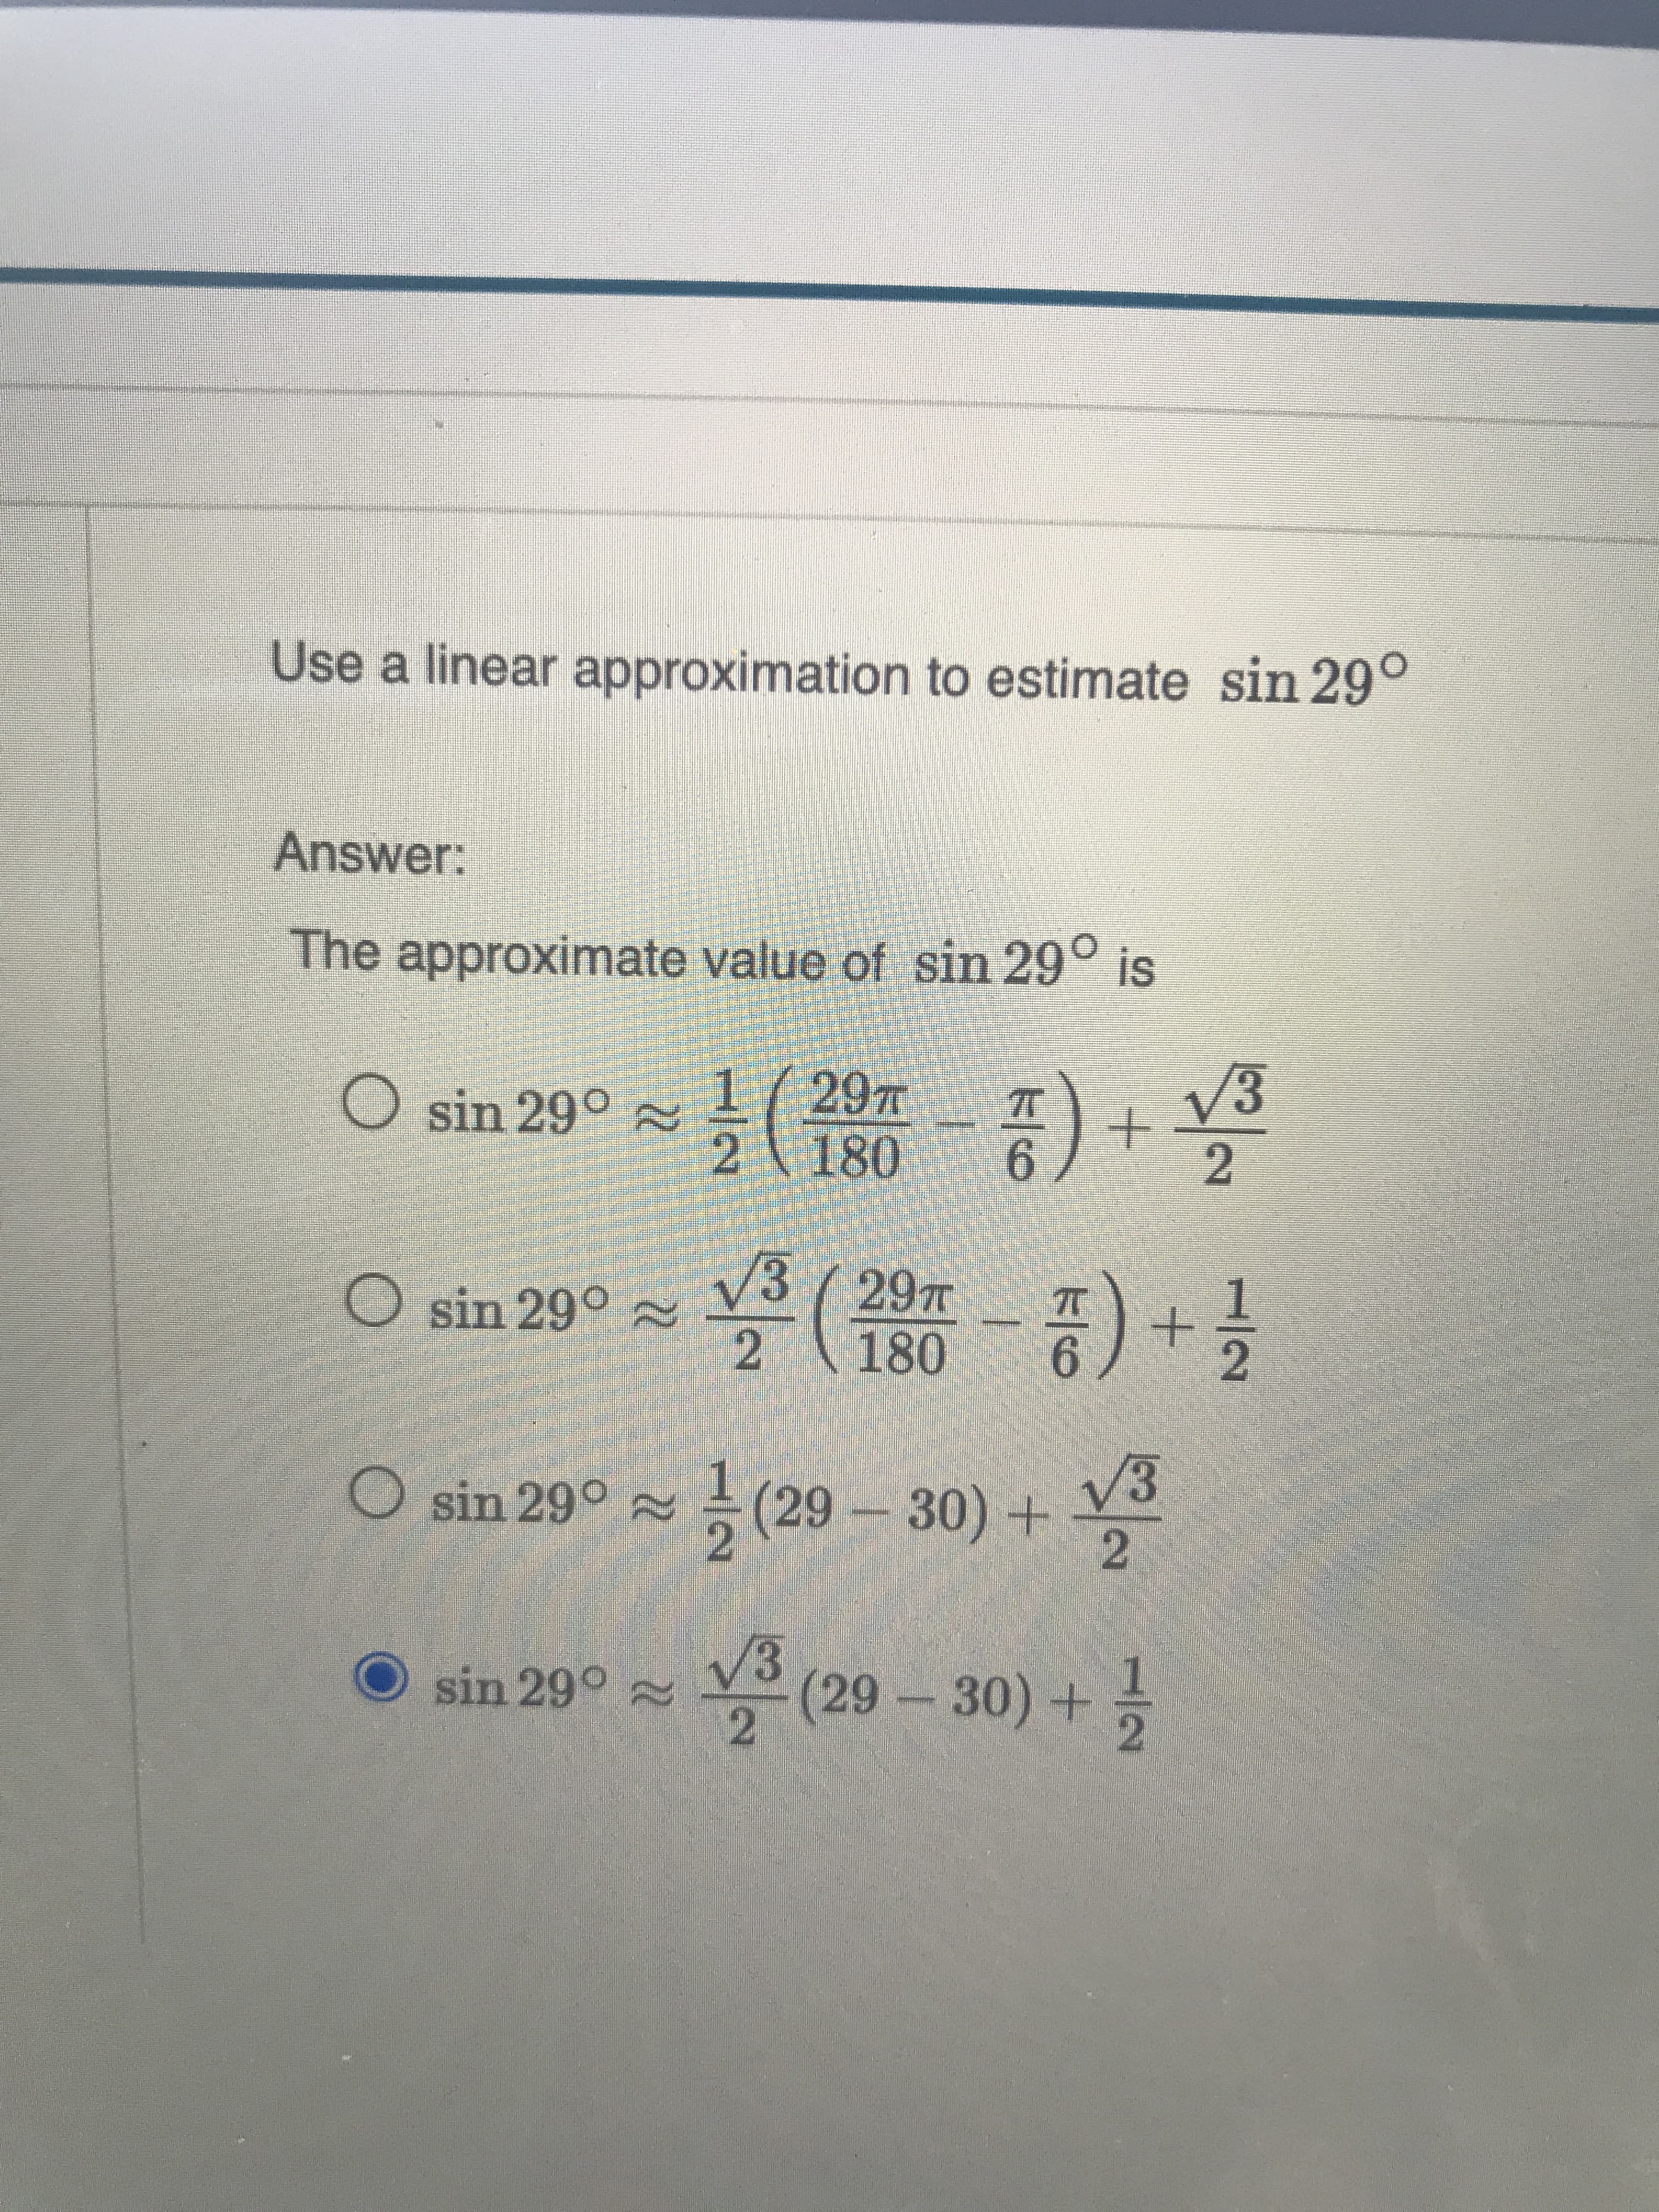 Use a linear approximation to estimate sin 29°
